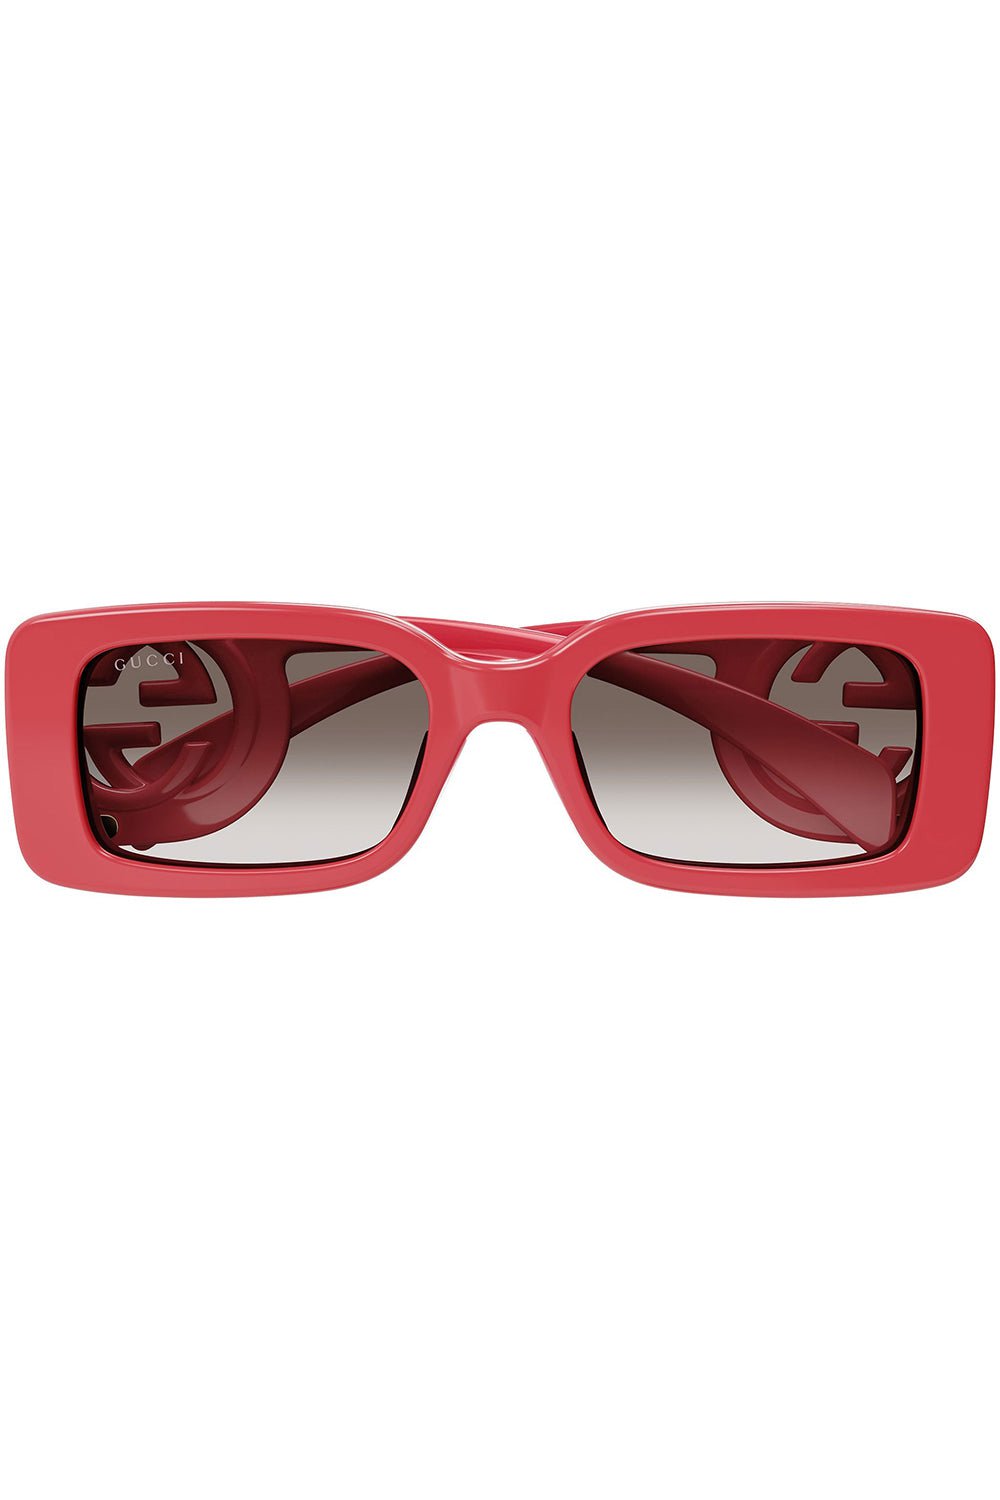 GUCCI-Rectangular Frame Sunglasses-RED/RED/BROWN